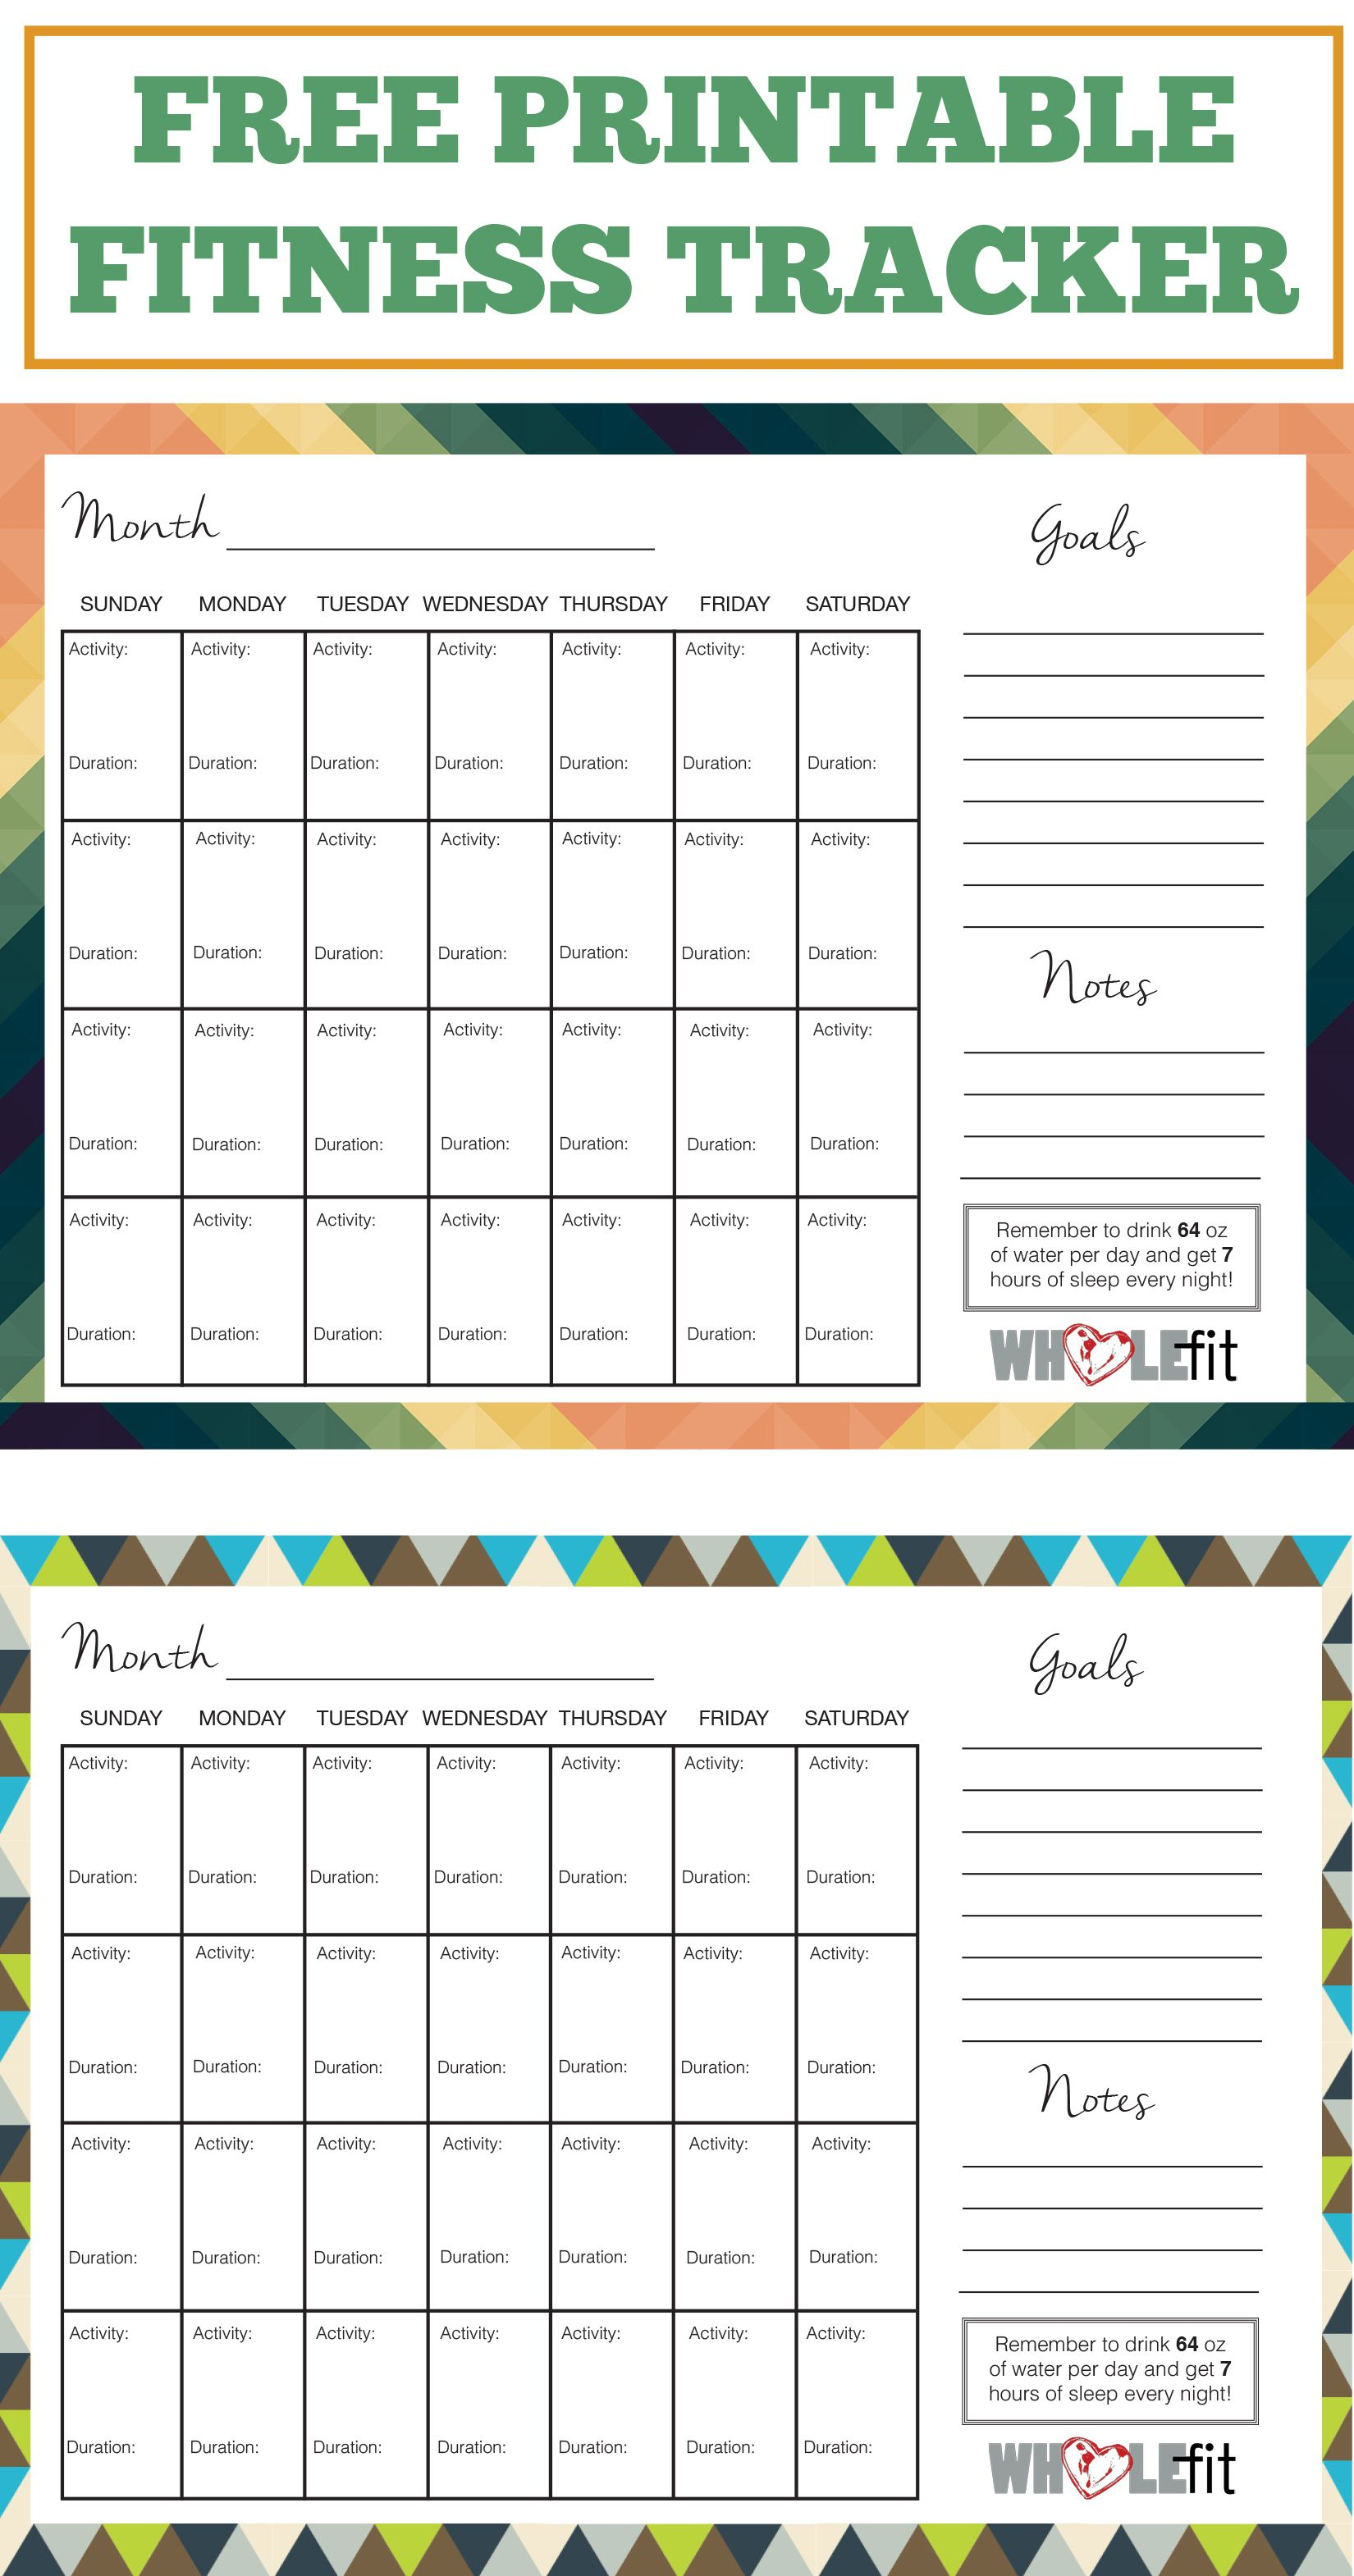 Track Your Progress With These Free Printable Fitness Trackers - Free Printable Fitness Tracker